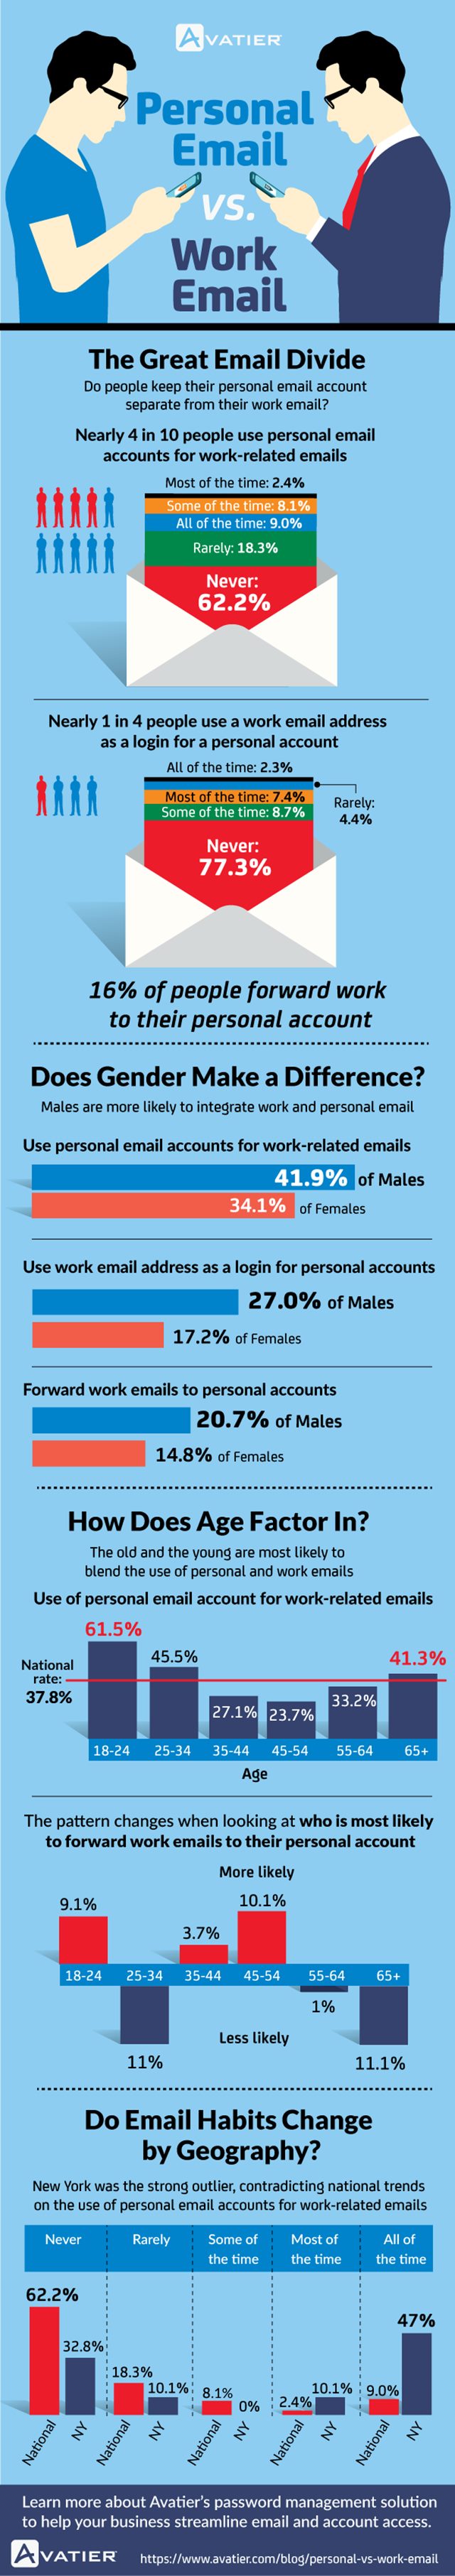 personal vs. work email